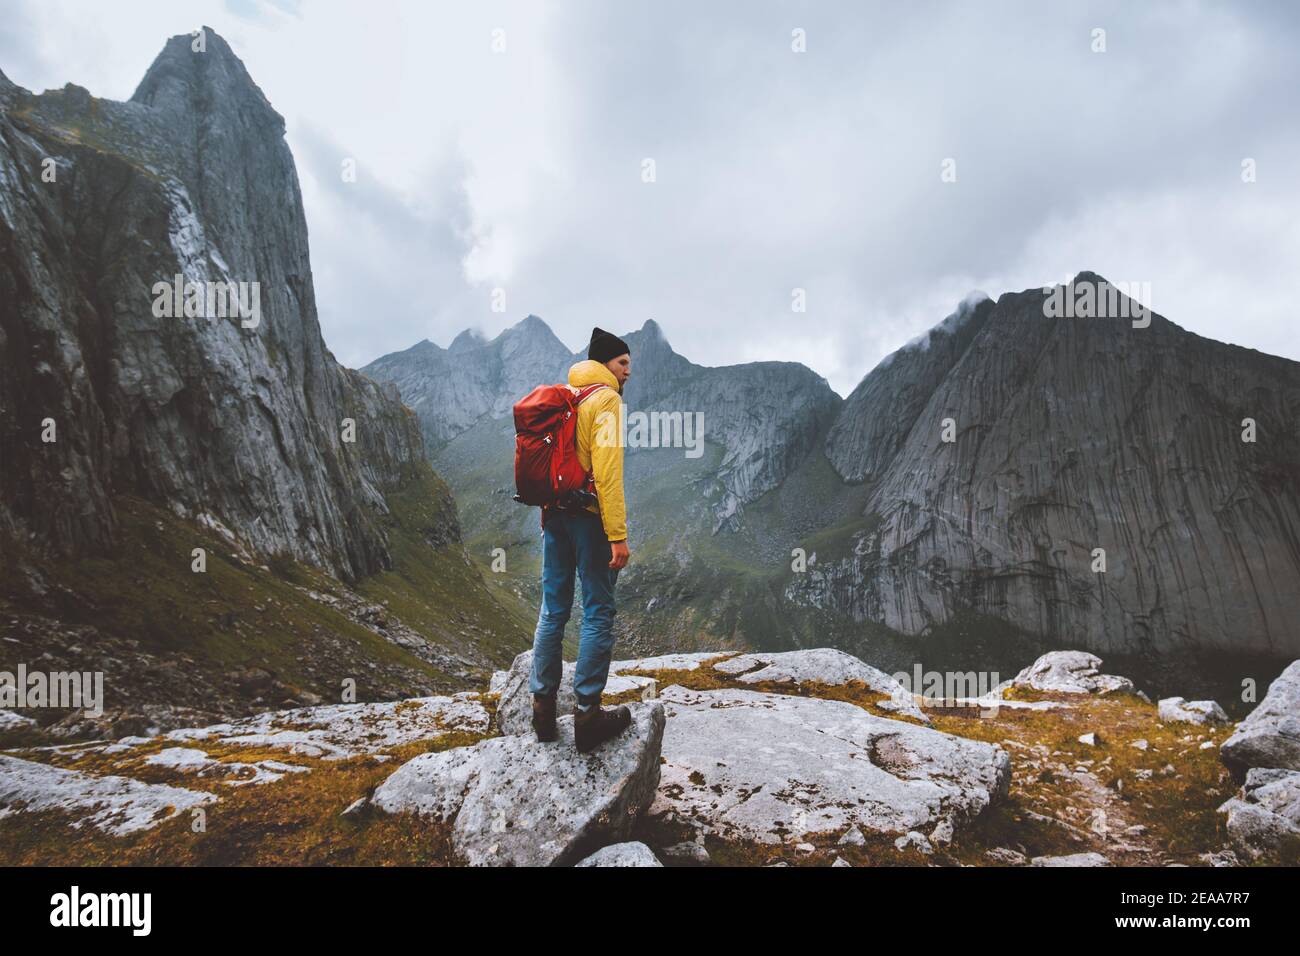 Man with backpack hiking solo in Norway mountains travel vacations outdoor adventure trekking active healthy lifestyle weekend getaway Stock Photo